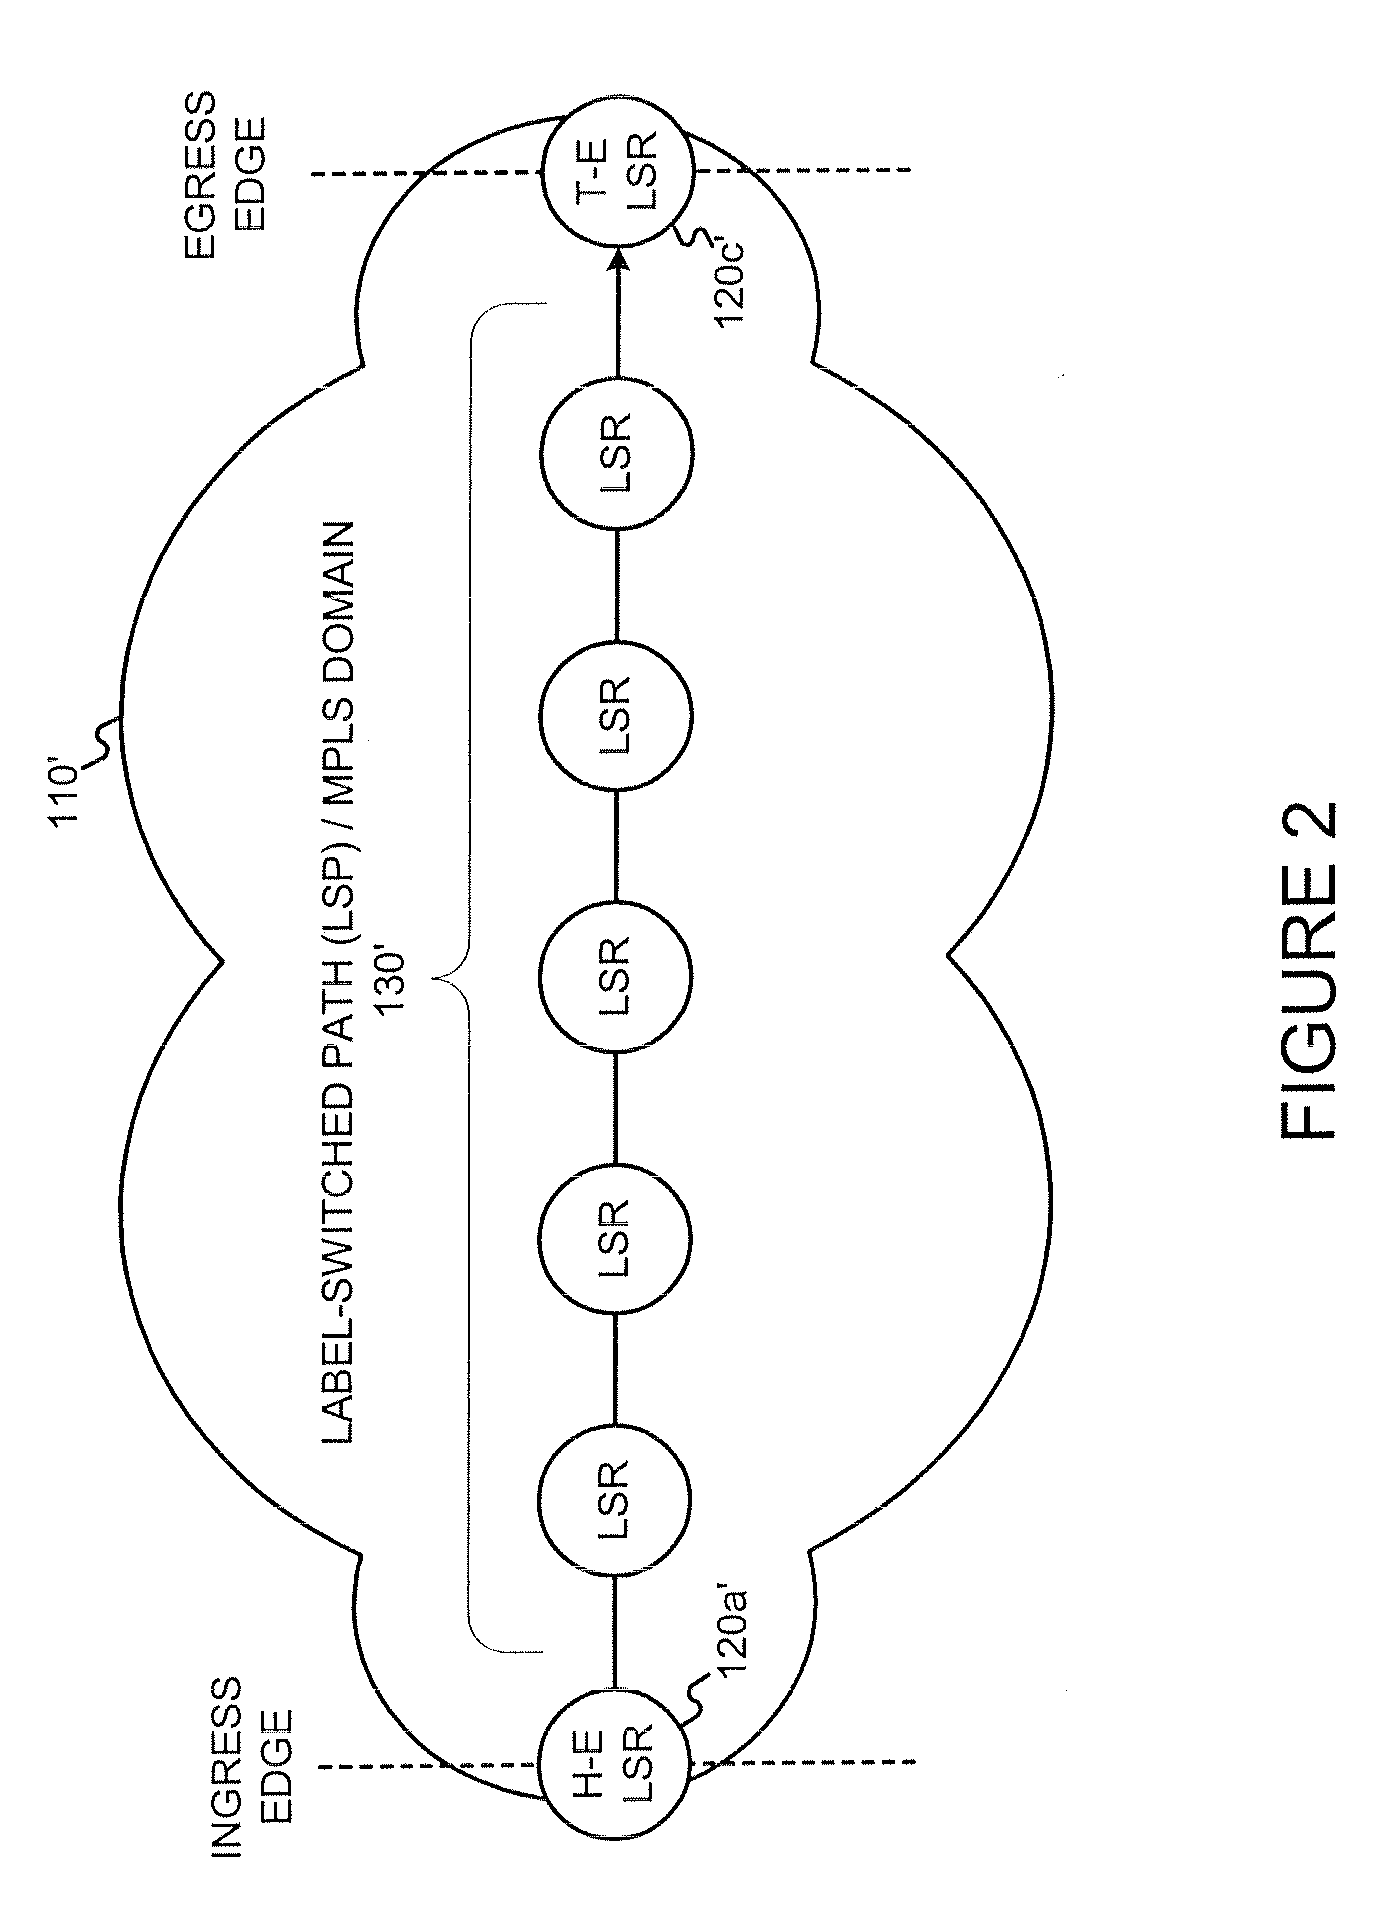 Edge devices for providing a transparent LAN segment service and configuration such edge devices